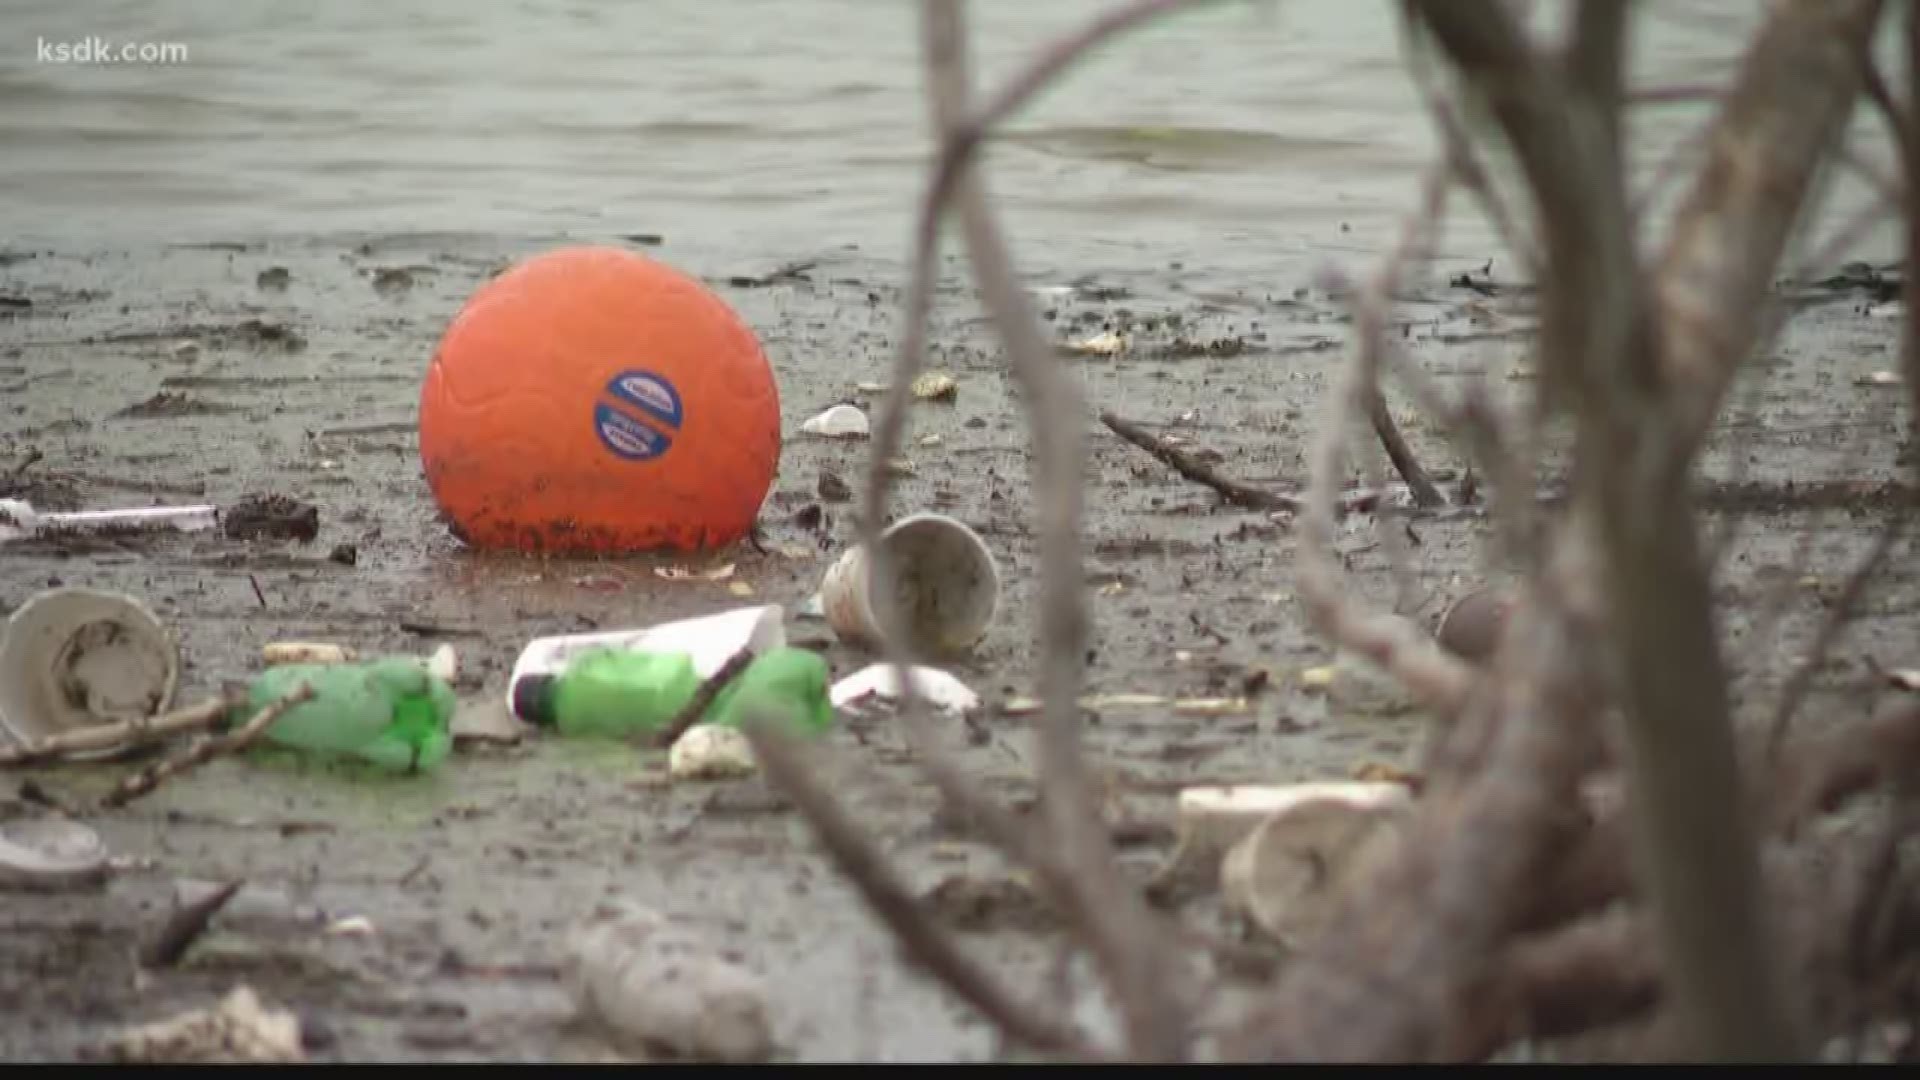 People who live near the River Des Peres want to clean up the trash collecting in it, but the health department says that's a bad idea